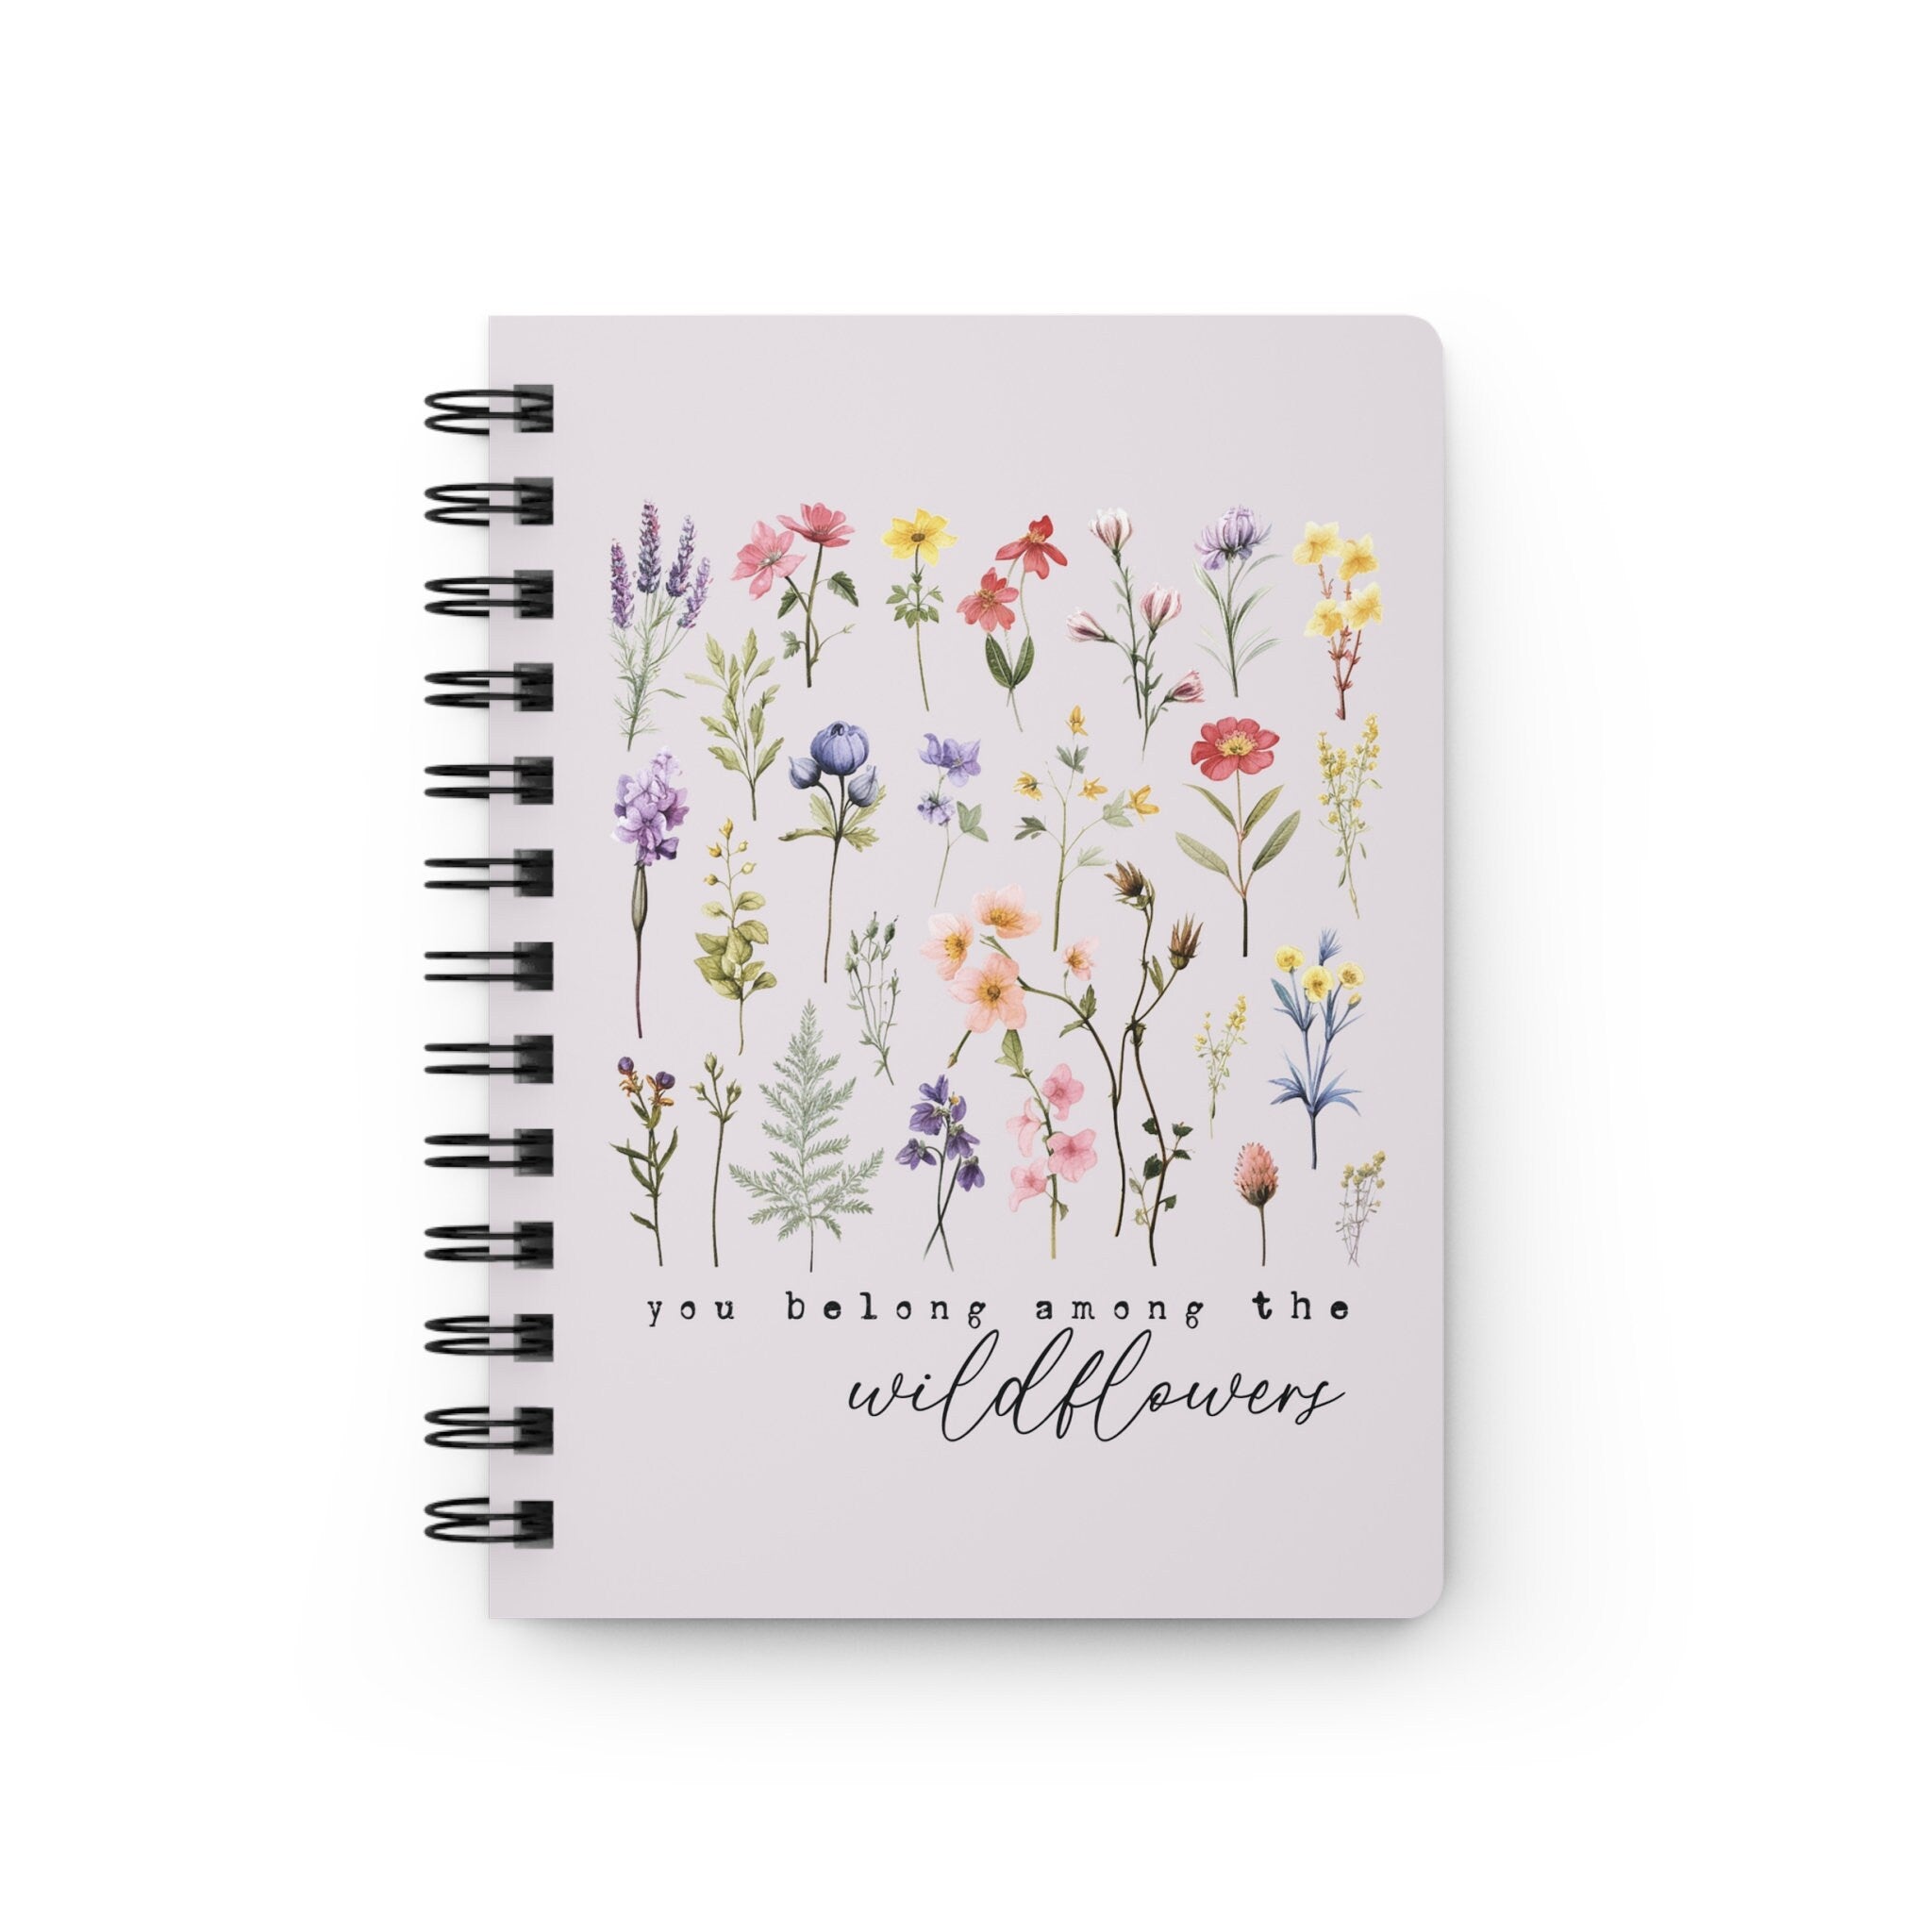 Floral Wildflower Botanical Garden Nature Spiral Reading Journal, Ruled Line Paper 5x7 Inch Size Reading Notebook, BOHO Cottagecore Inspired